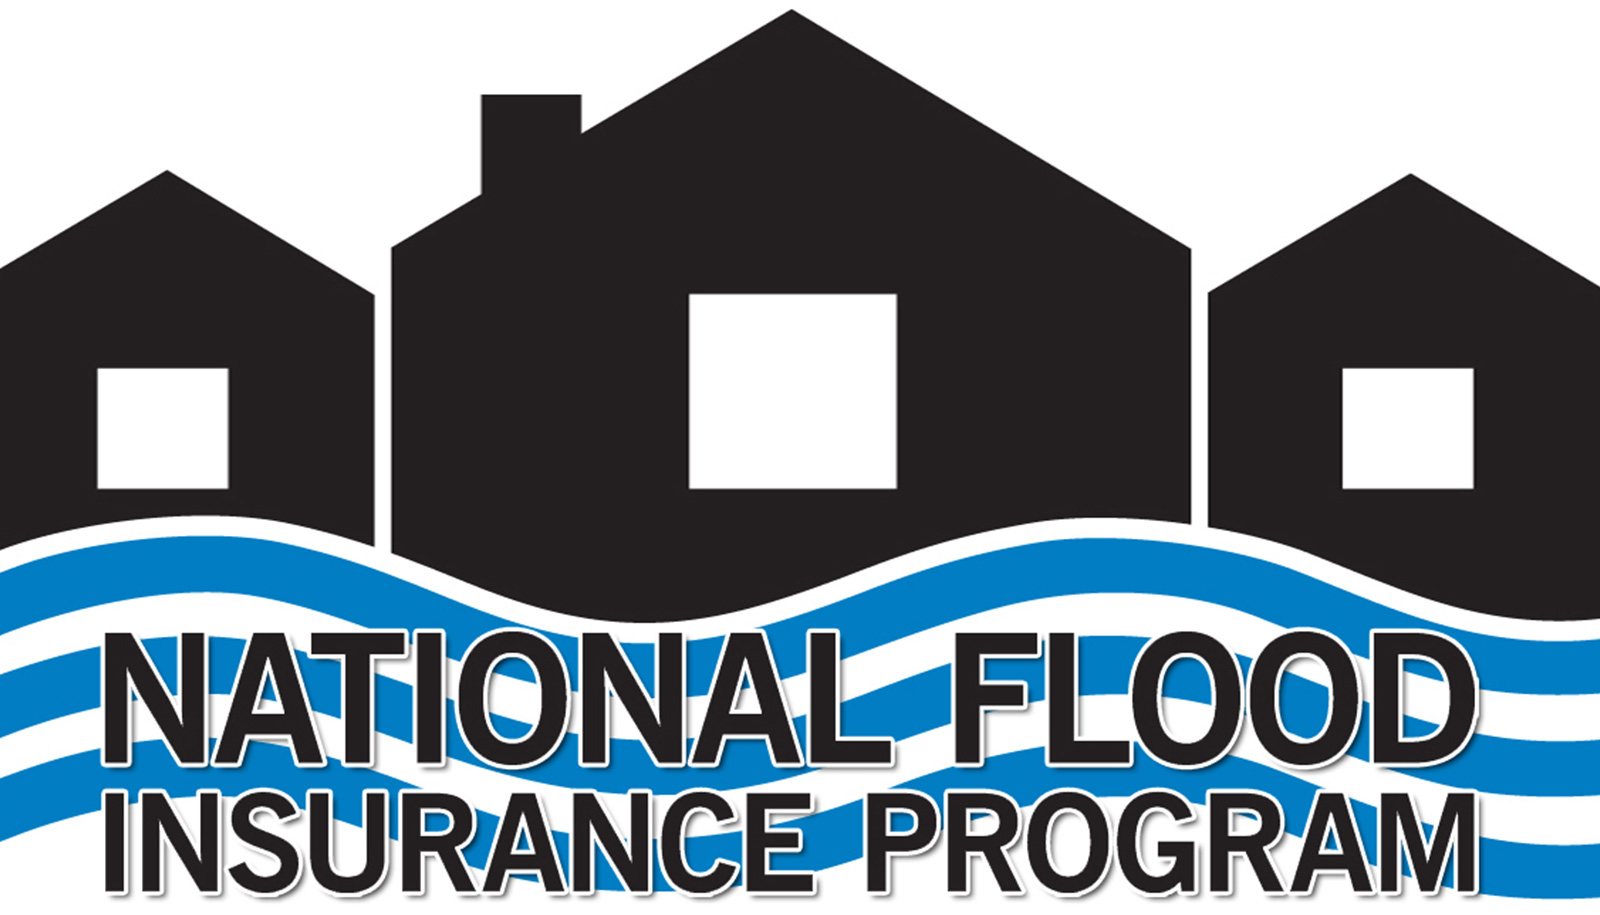 What is the National Flood Insurance Program?